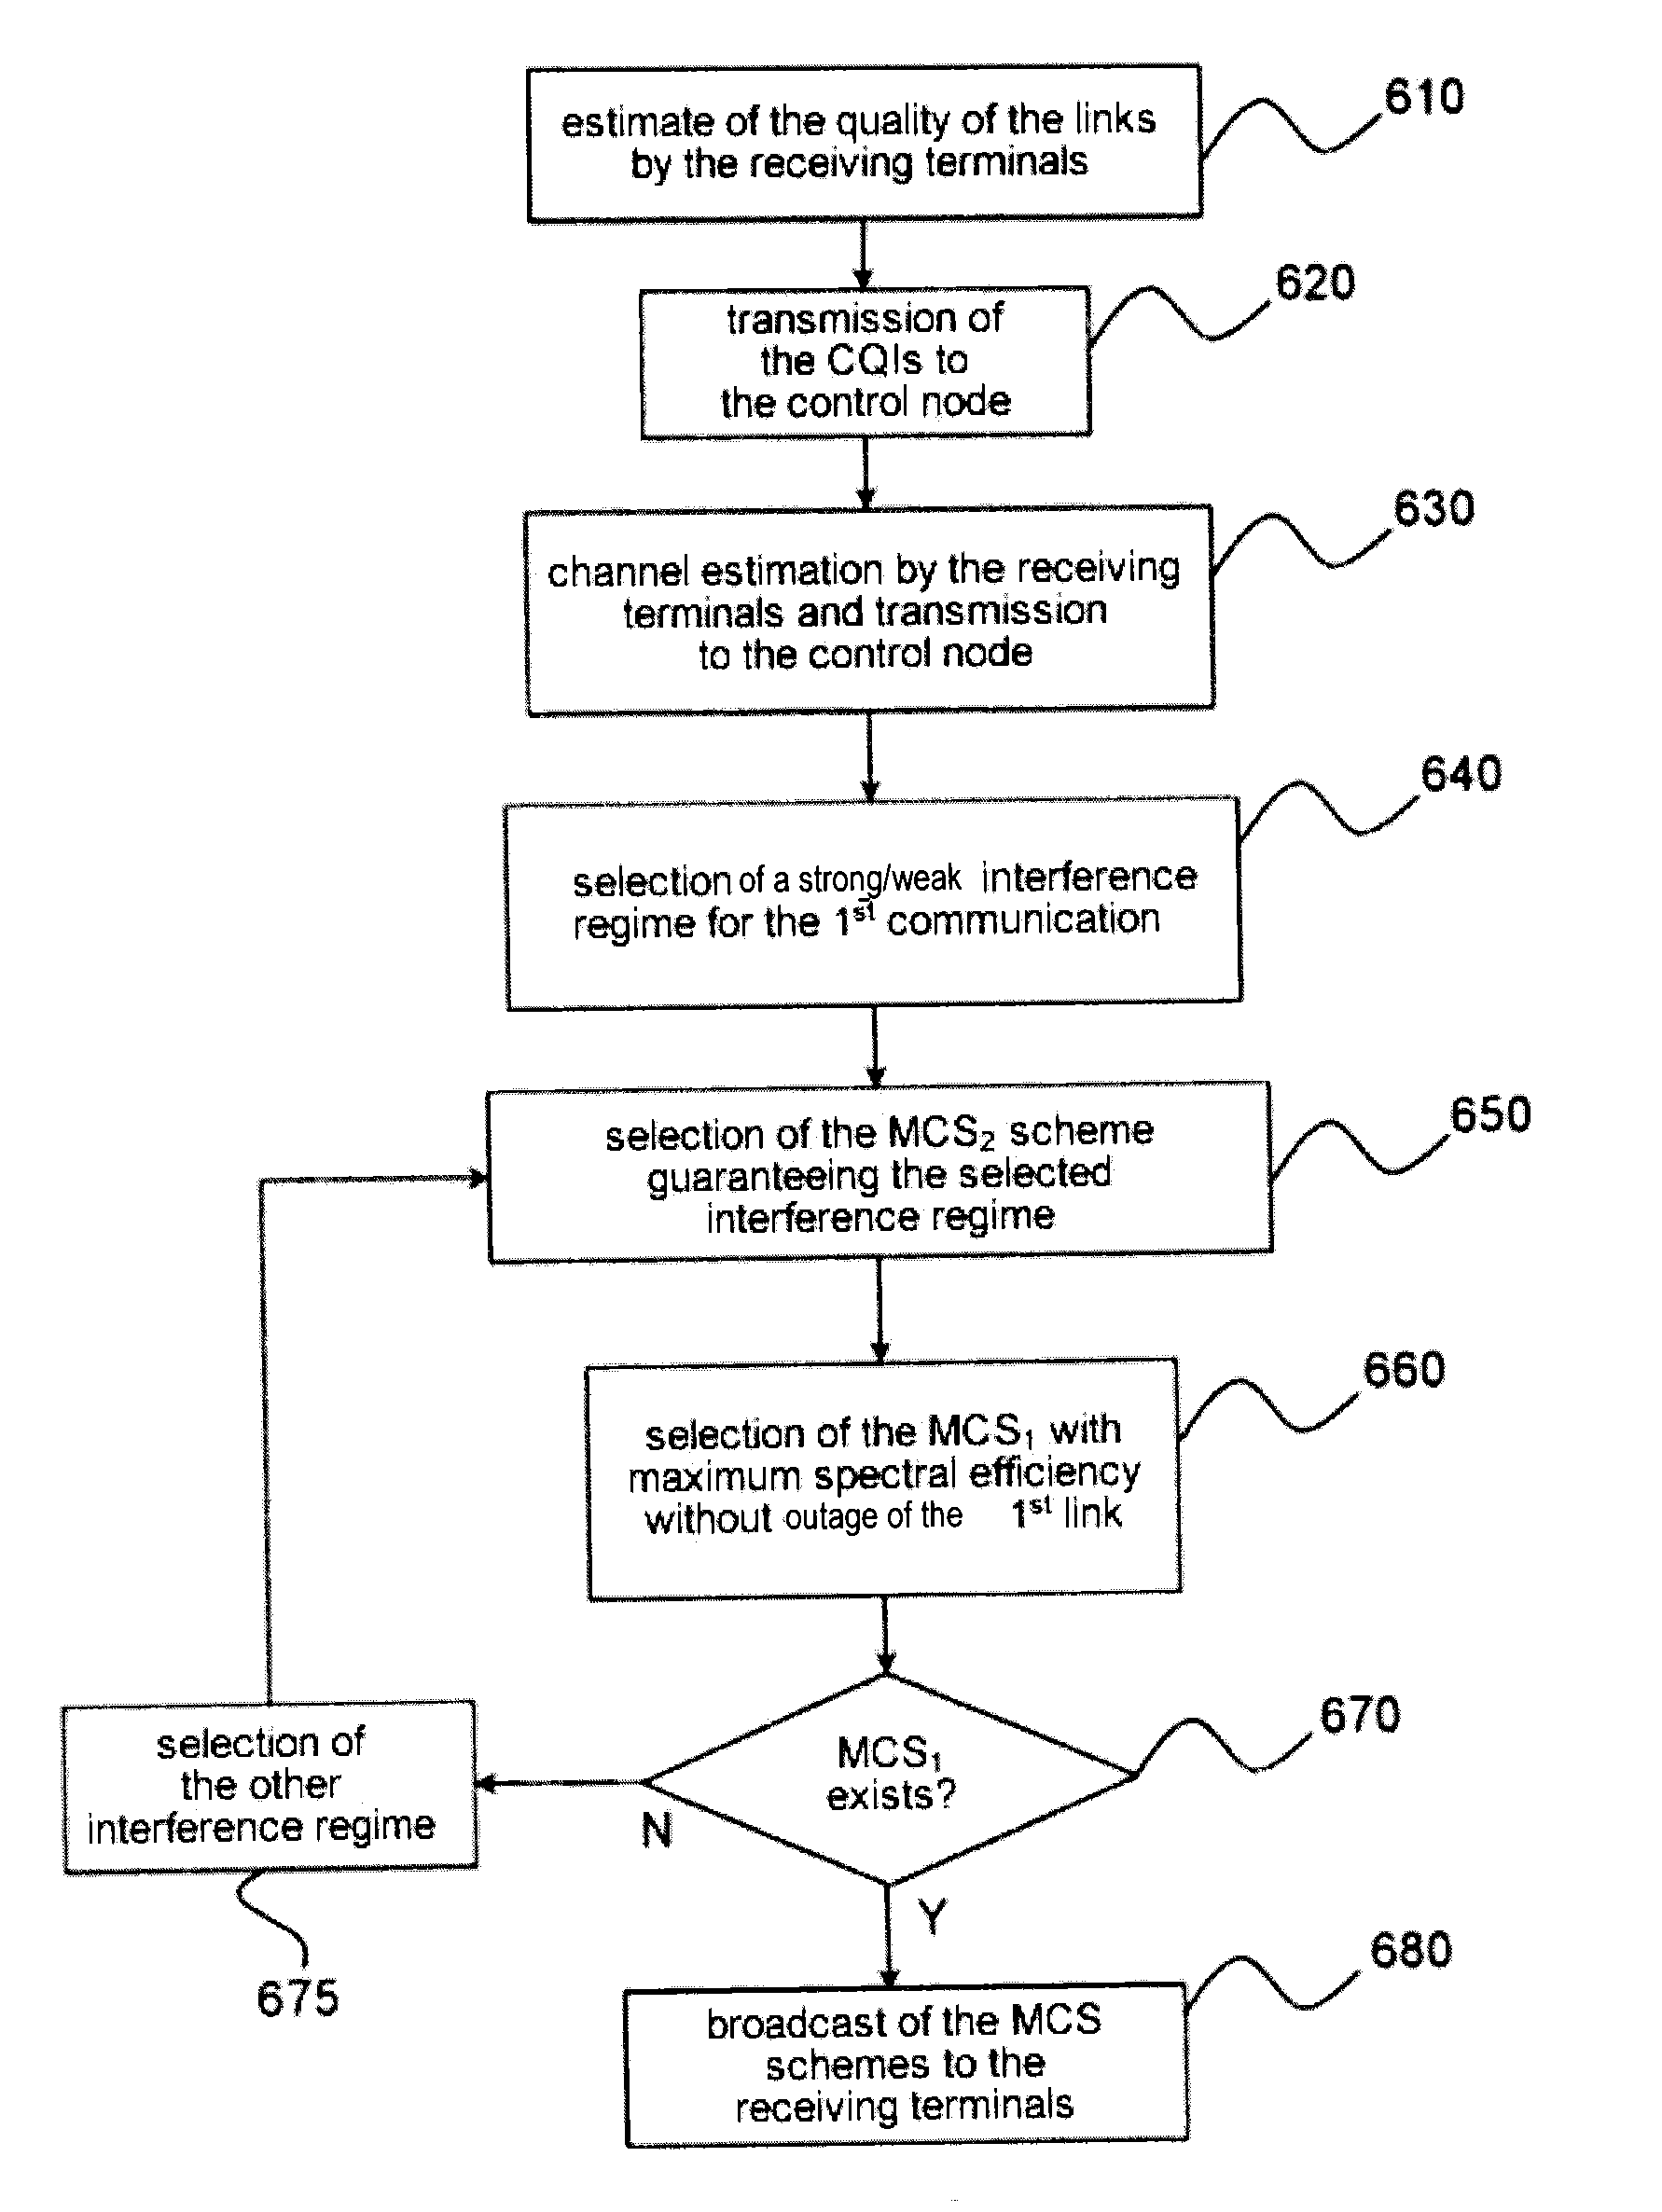 Link adaptation method supervised by the selection of an interference regime